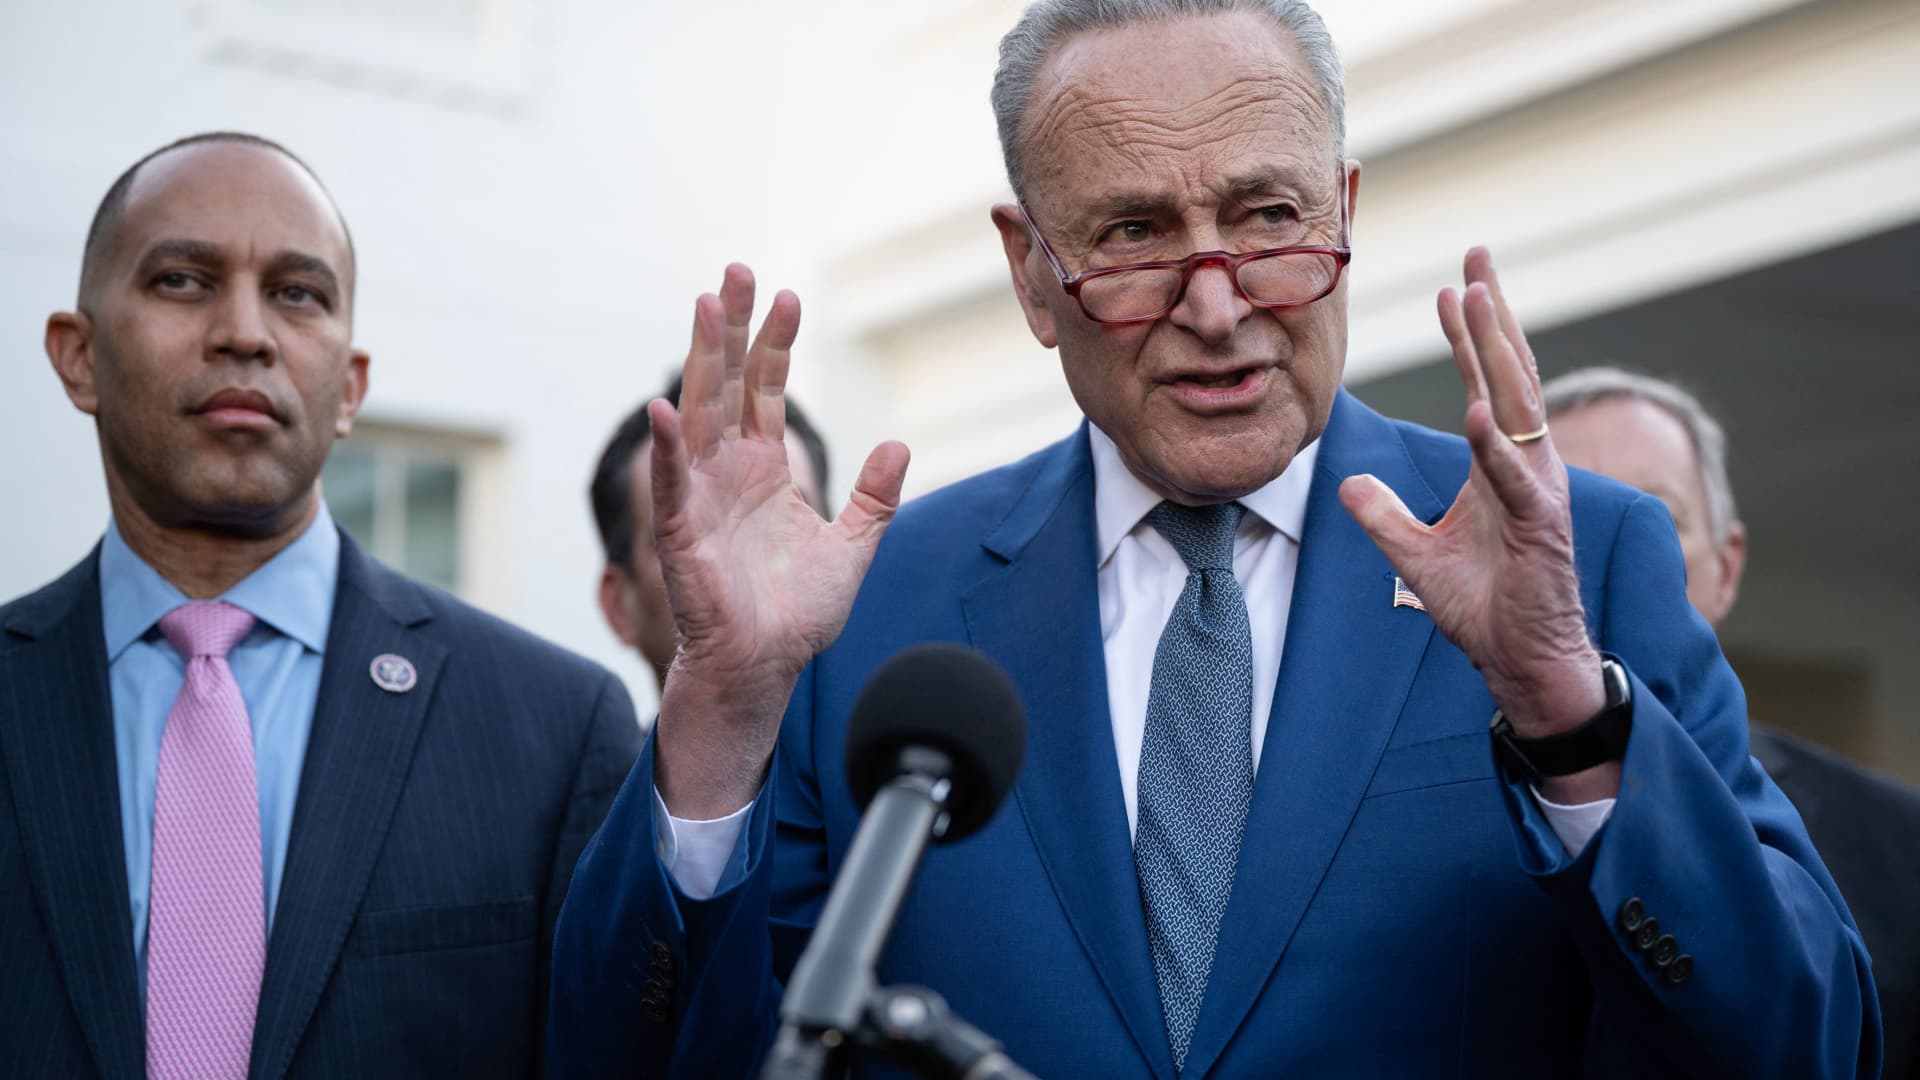 democrats-harden-their-message-on-the-debt-ceiling-while-quietly-paving-the-way-for-a-deal